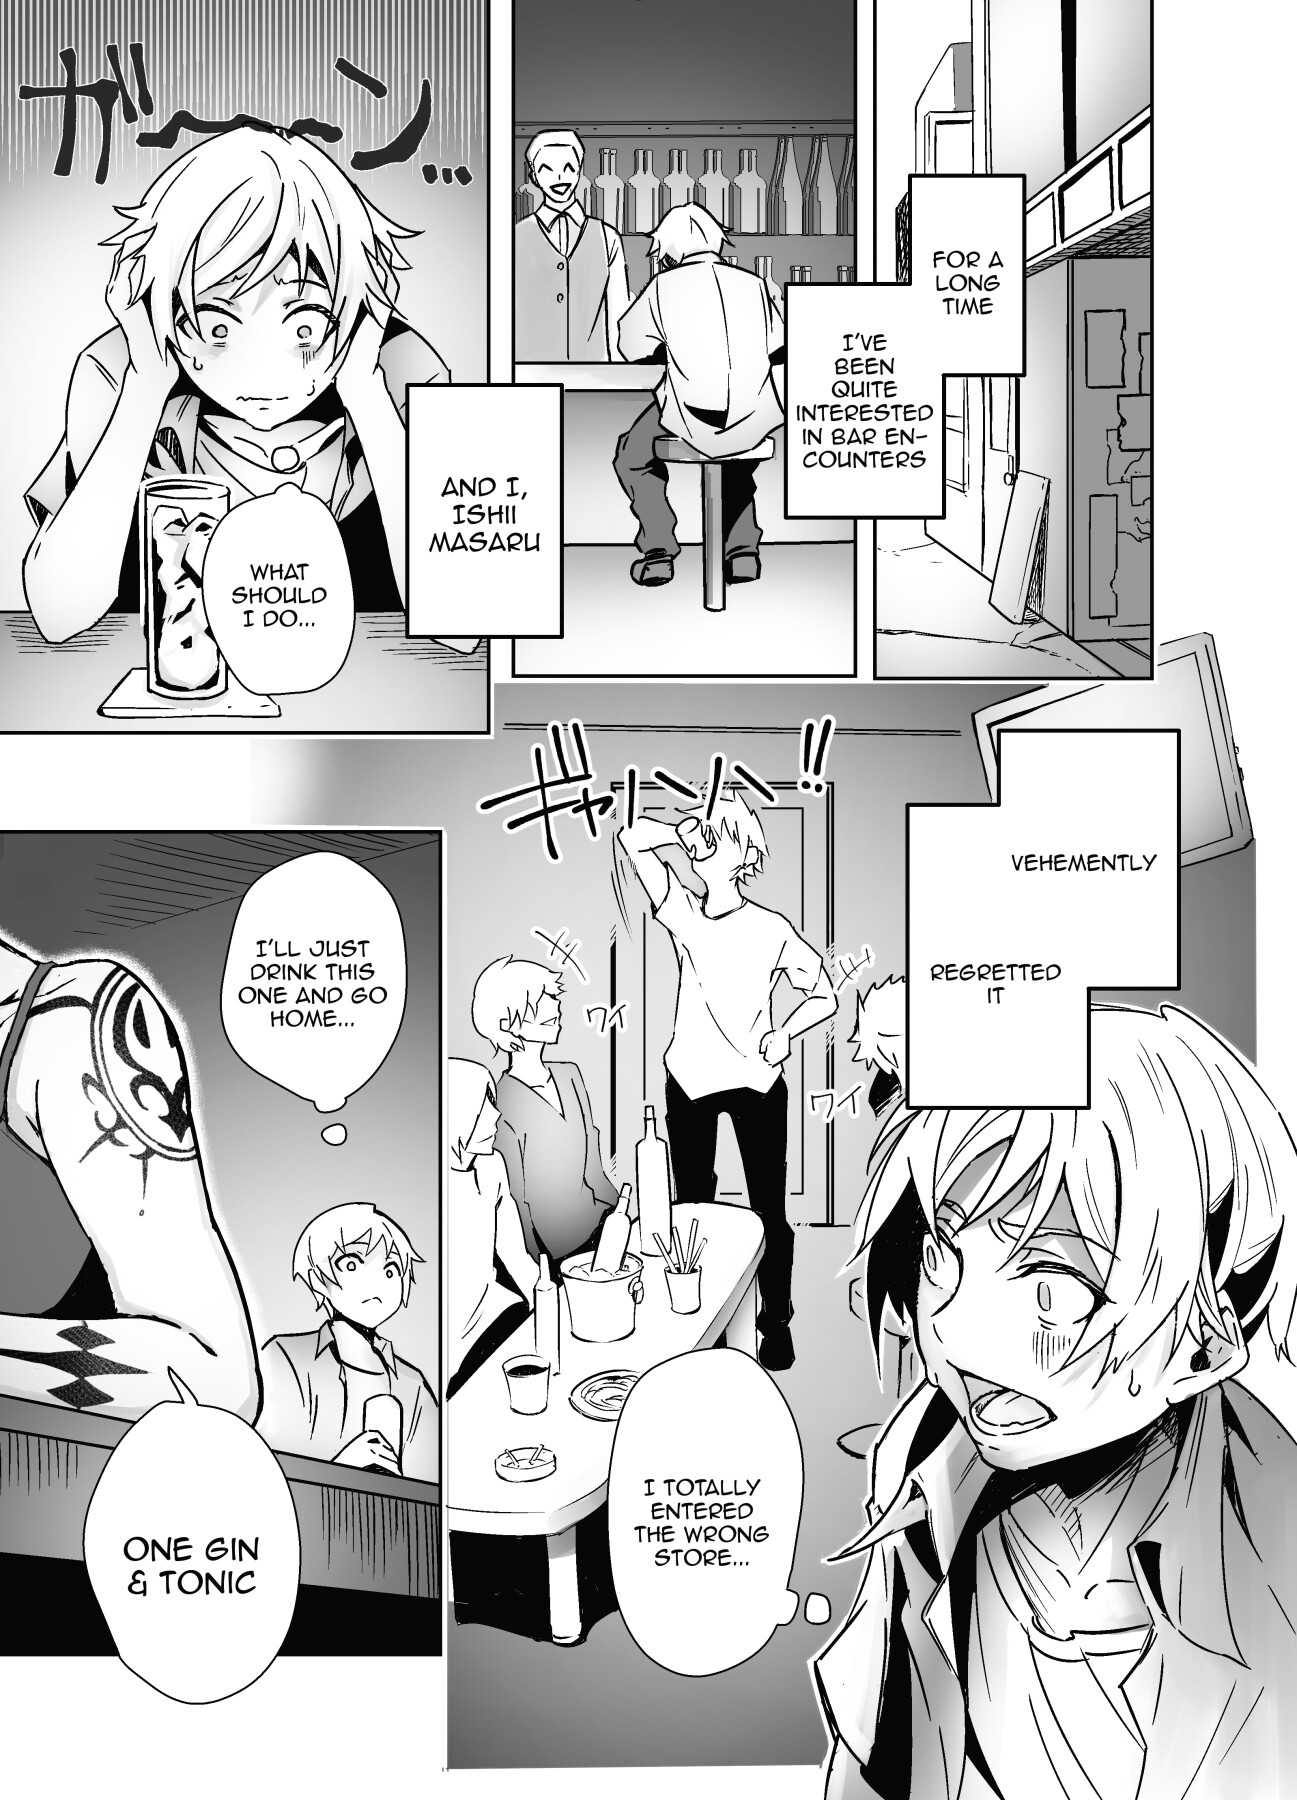 Hentai Manga Comic-The Perverted Love I Have With A Girl With Full-Body Tattoos That I Met At a Bar-Read-2